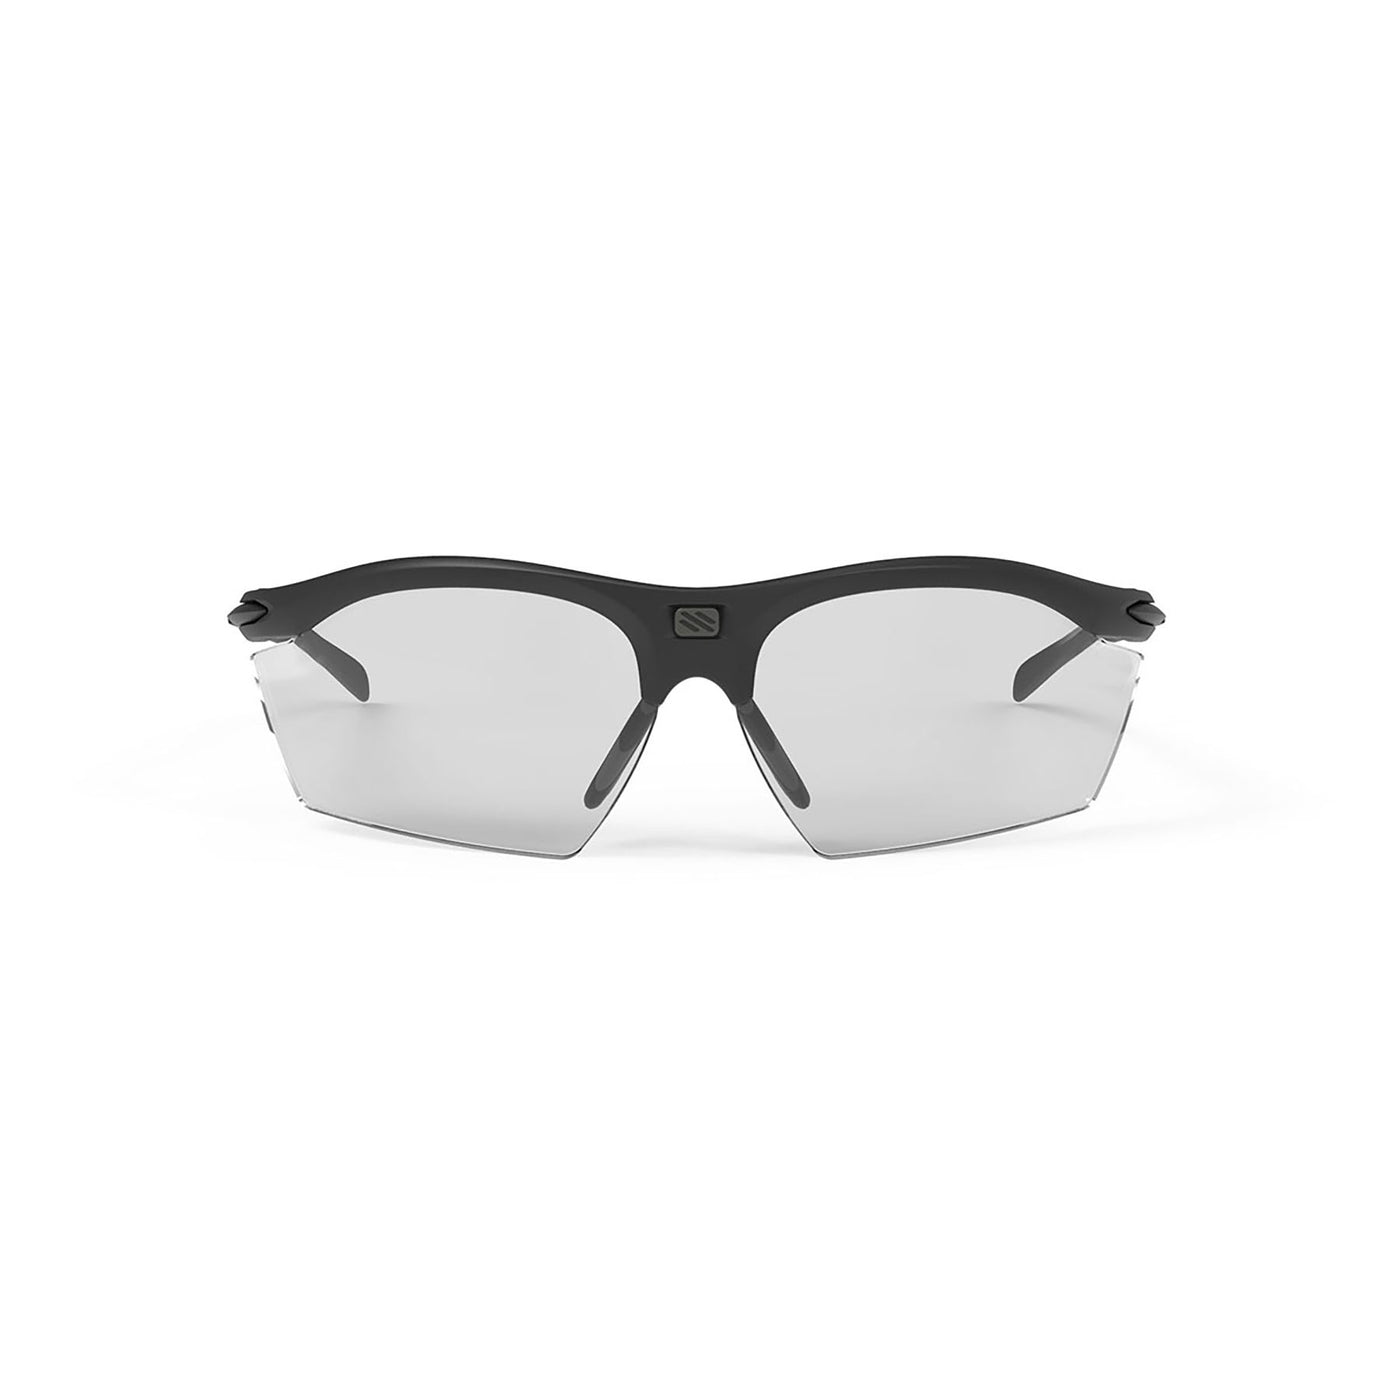 Rudy Project prescription ready running and cycling ansi Z87.1 sunglasses#color_rydon-stealth-matte-black-frame-and-impactx-photochromic-2-black-lenses